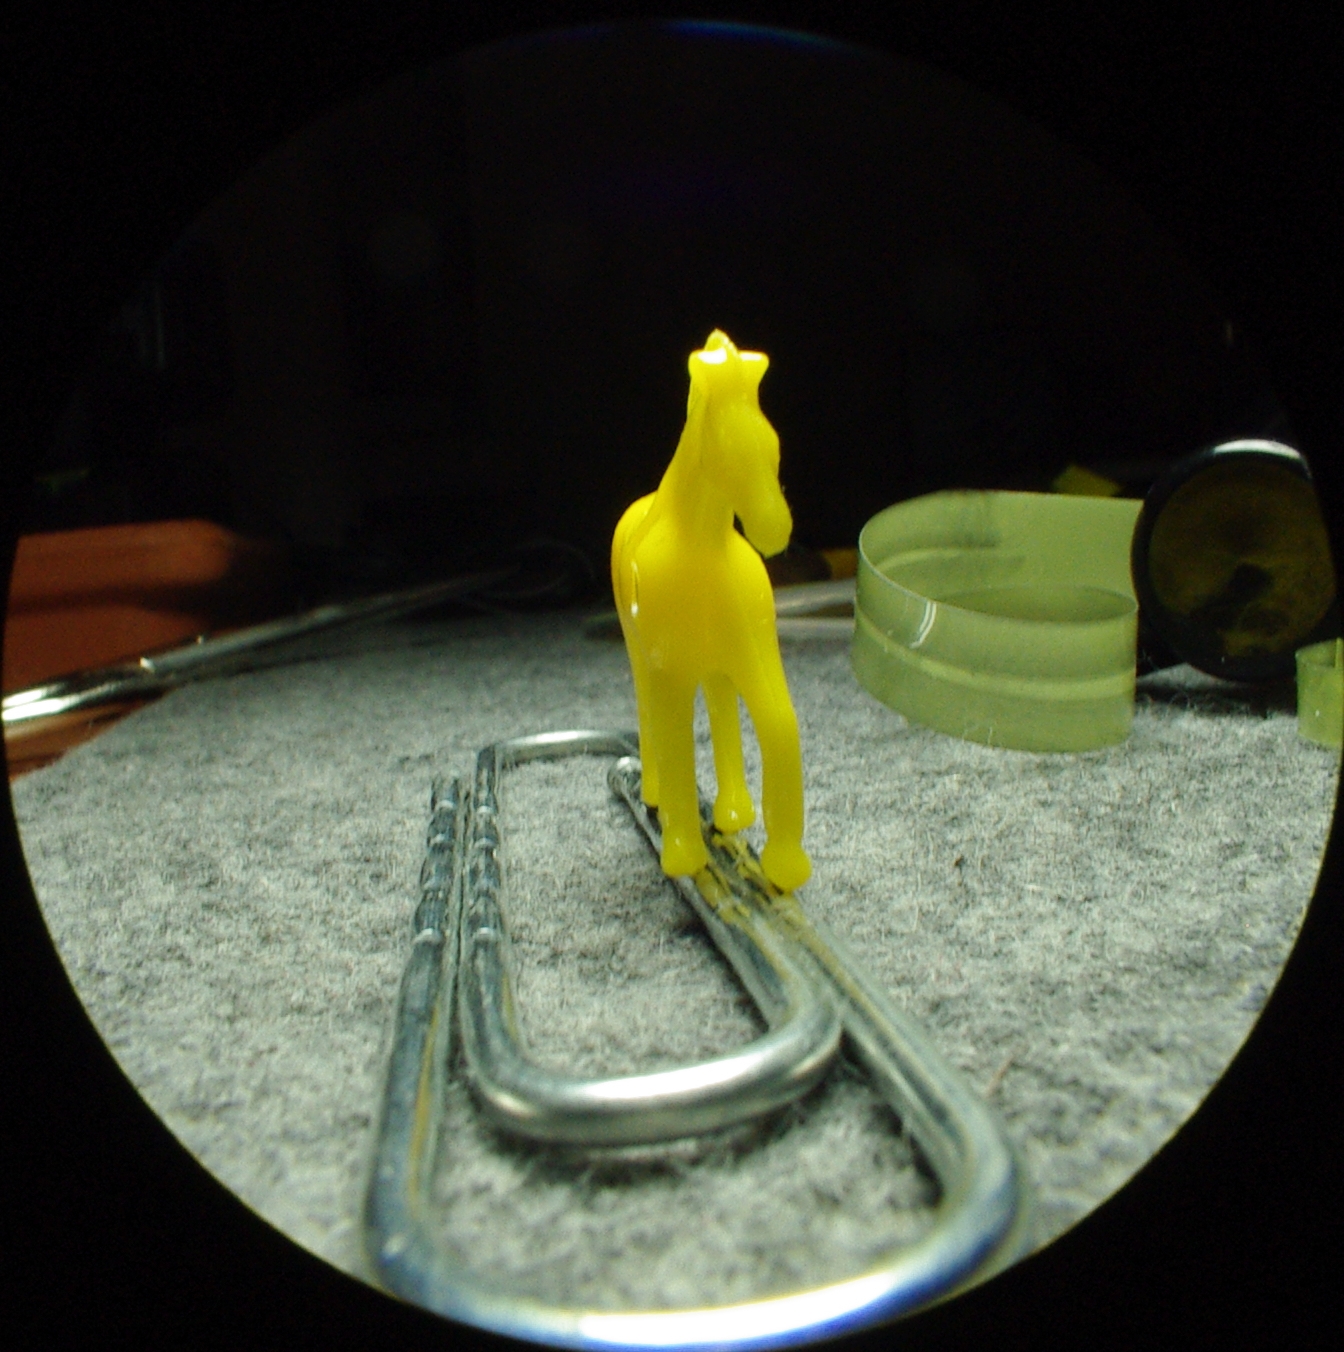 yellow plastic figures next to sunglasses on a round table